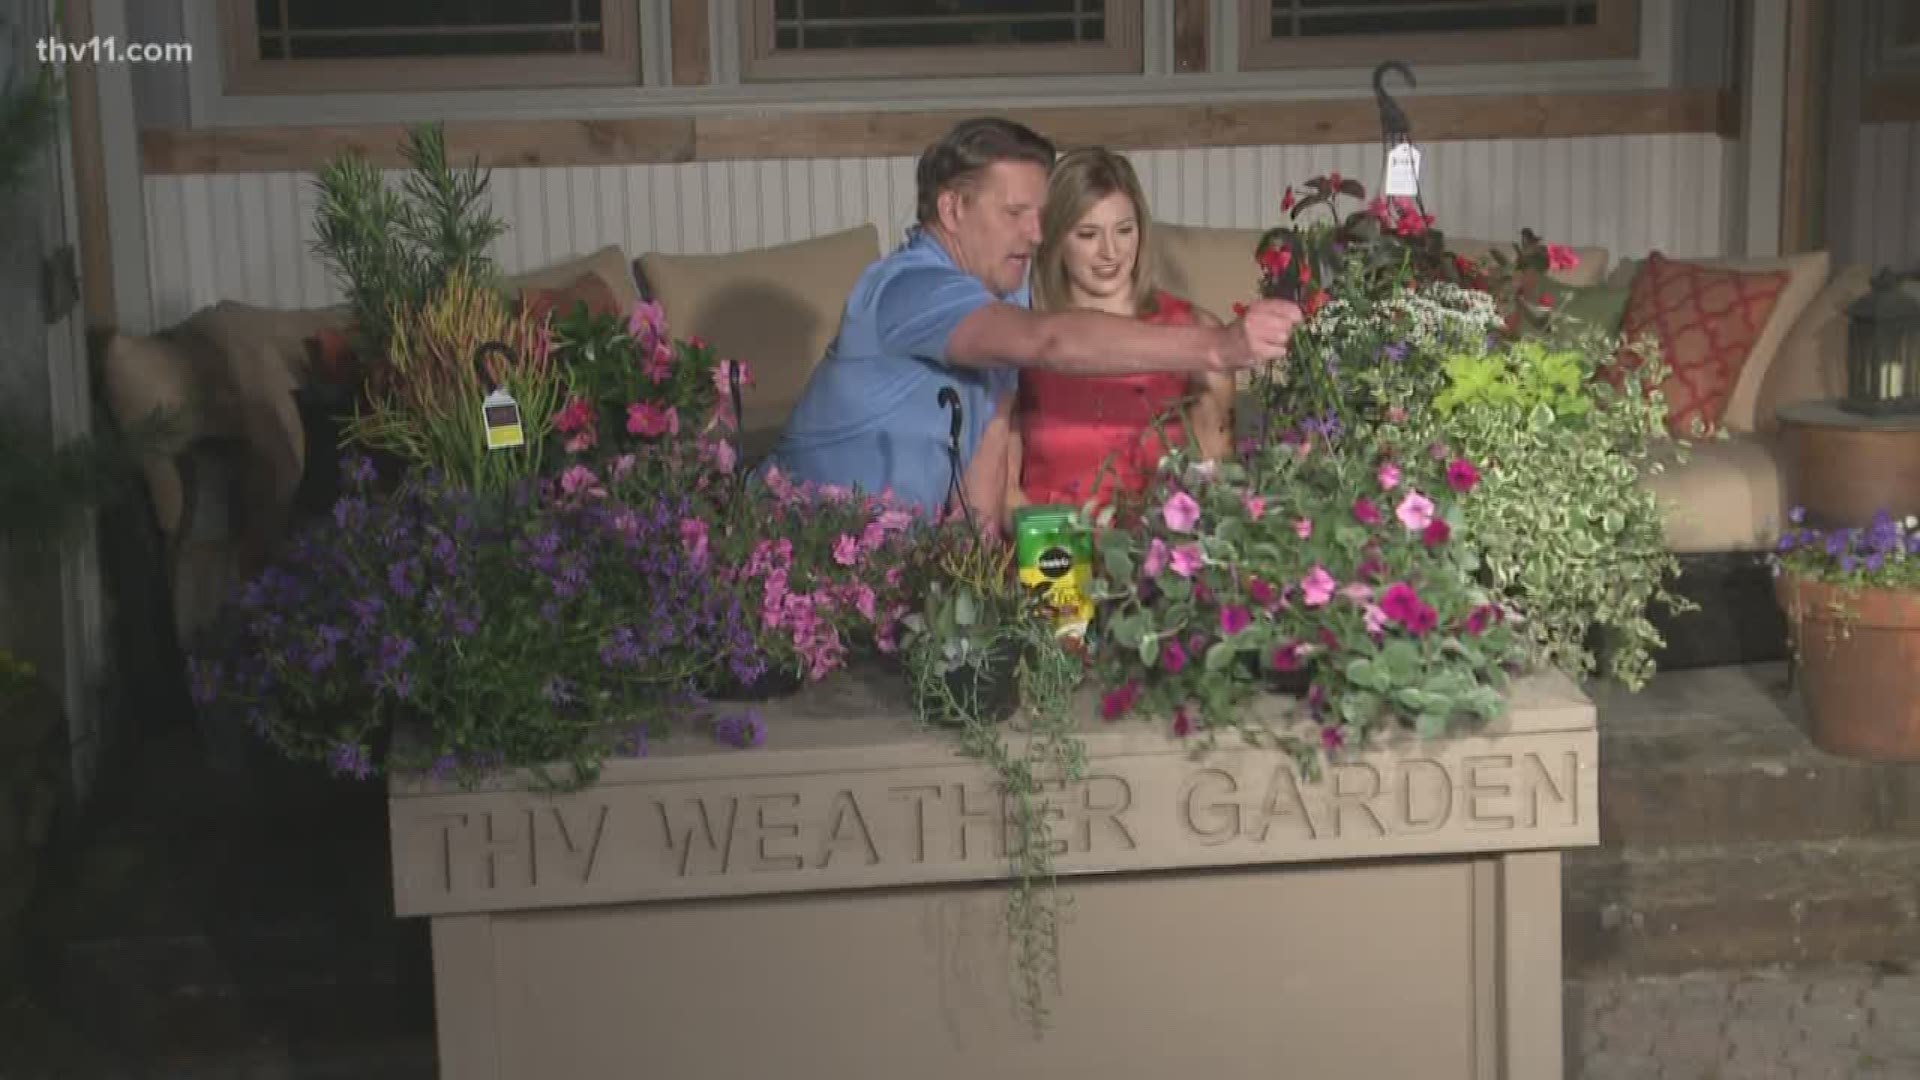 Chris H. Olsen shows some outlandish plants to decorate your garden with.